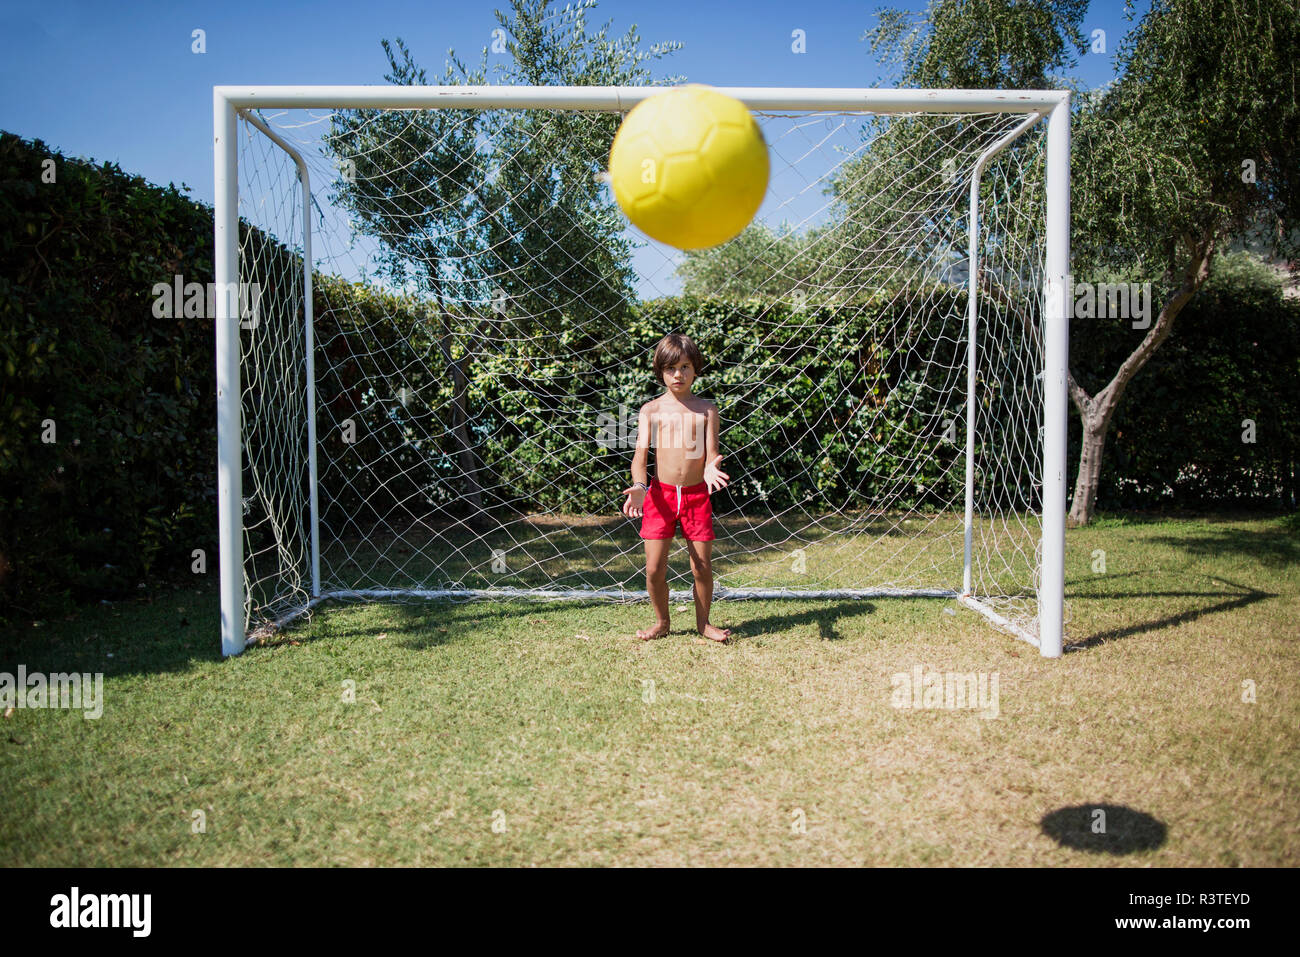 Little boy standing in front of soccer goal watching football Stock Photo